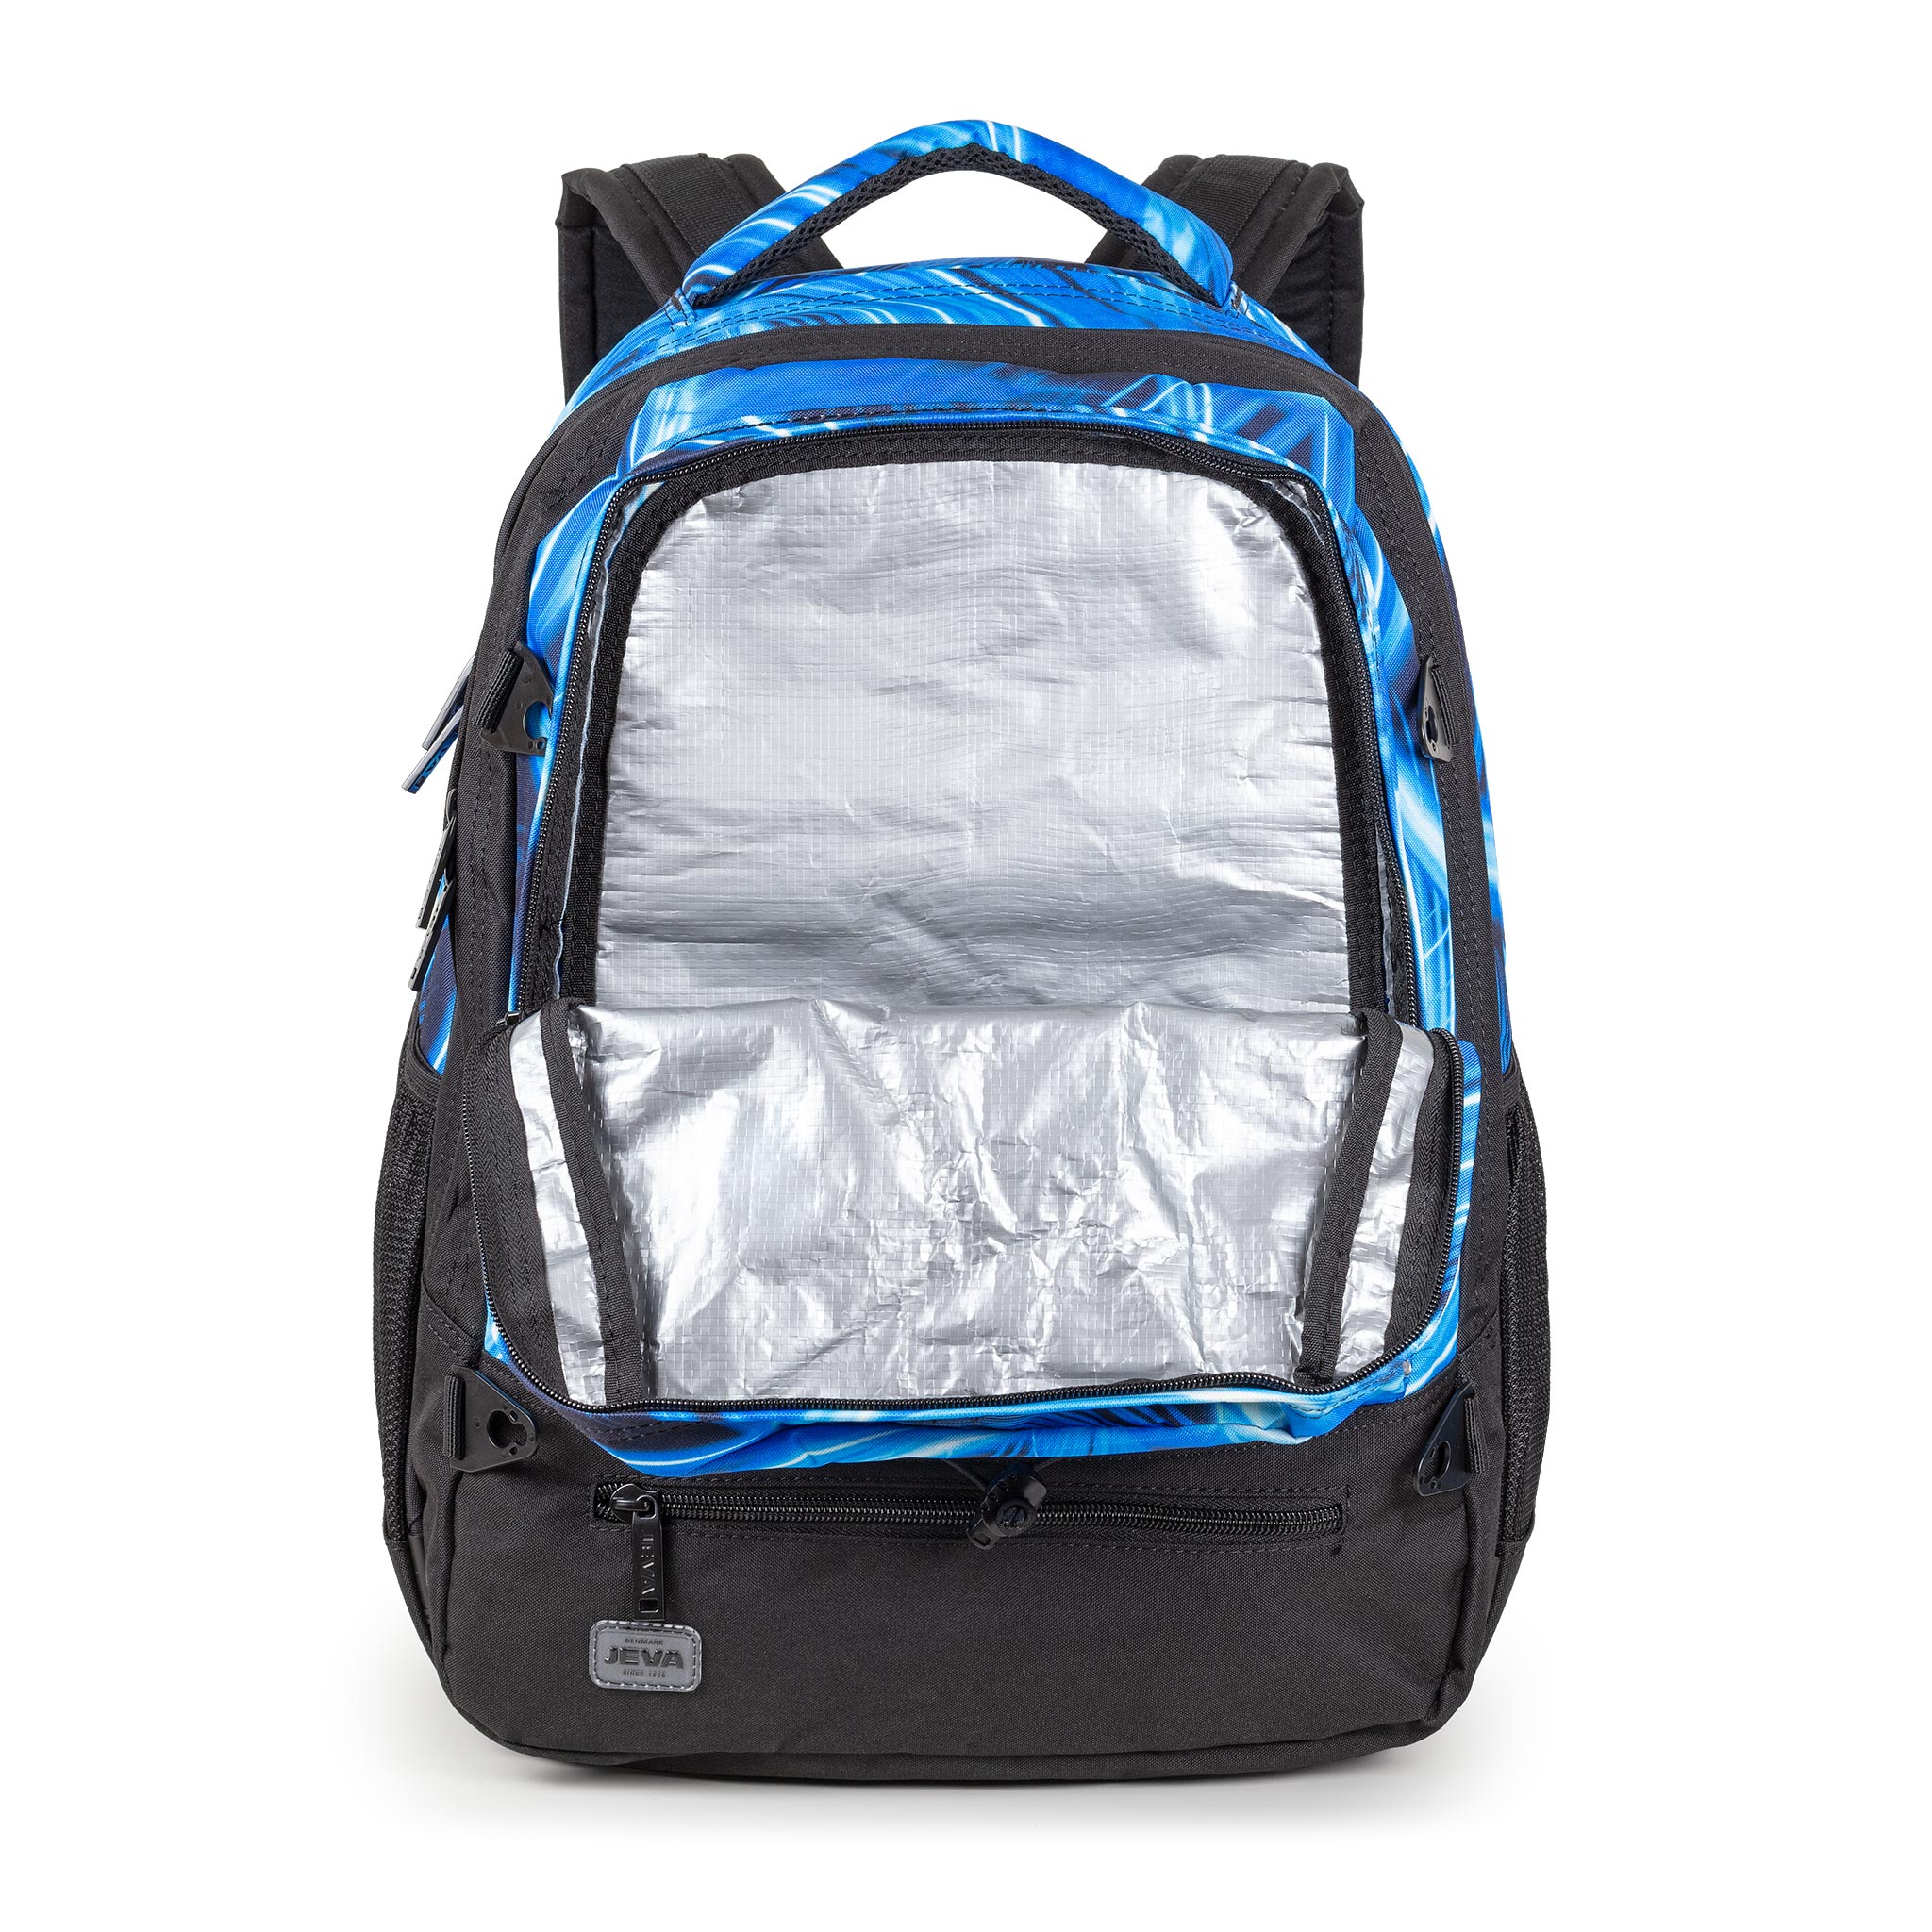 motto scrap Serviceable Backpack for older children: SUPREME from JEVA with a cool blue print